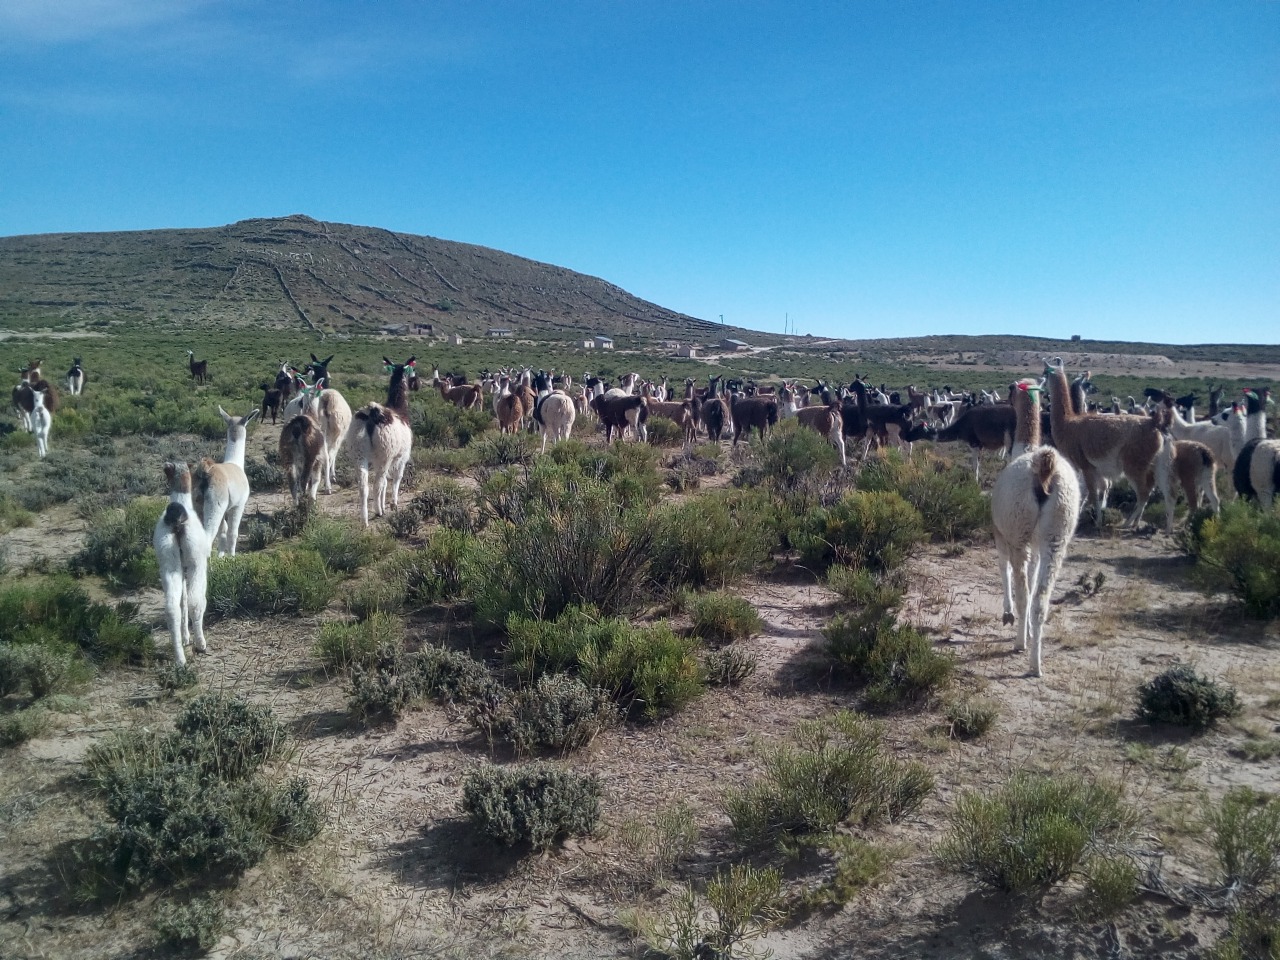 Camelids in Chaco